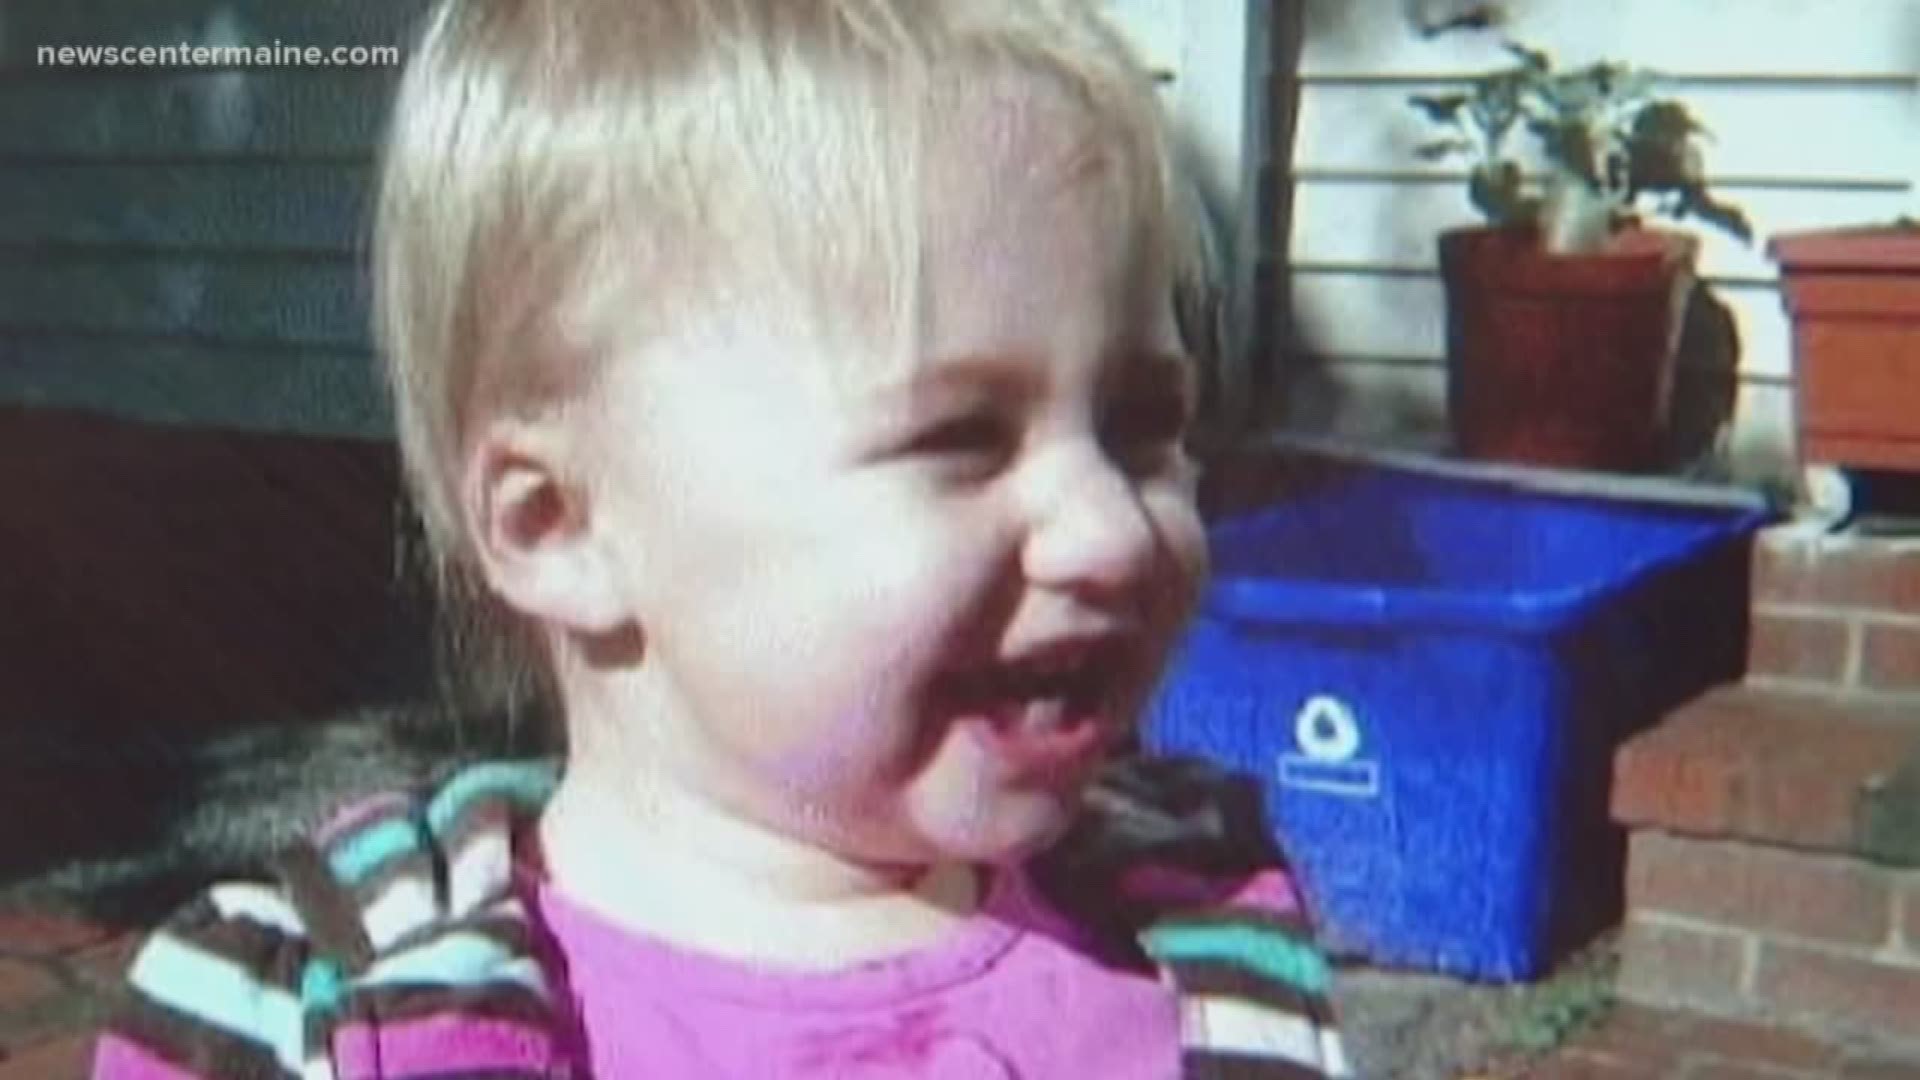 It may be a year and a half to two years until the Ayla Reynolds case goes to trial.